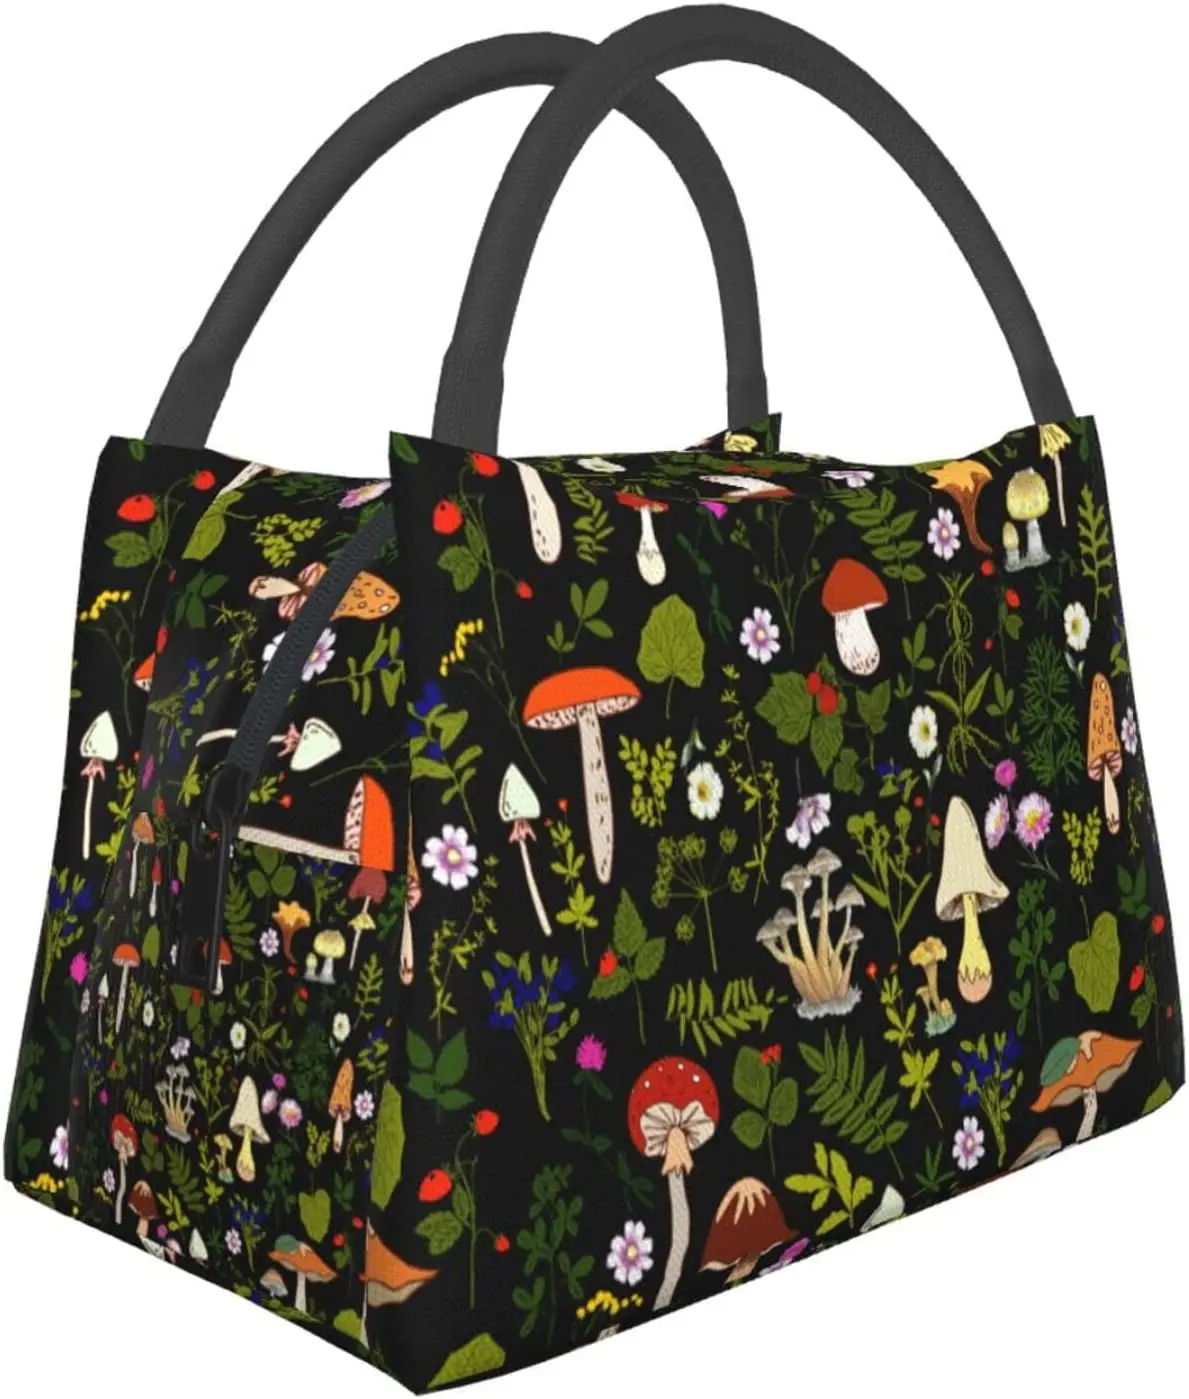 

Mushrooms Fungi Nature Lunch Bag Insulated Lunch Box Cooler Tote Bag for Teens Adults Thermal Tote Bag for Work Travel Picnic